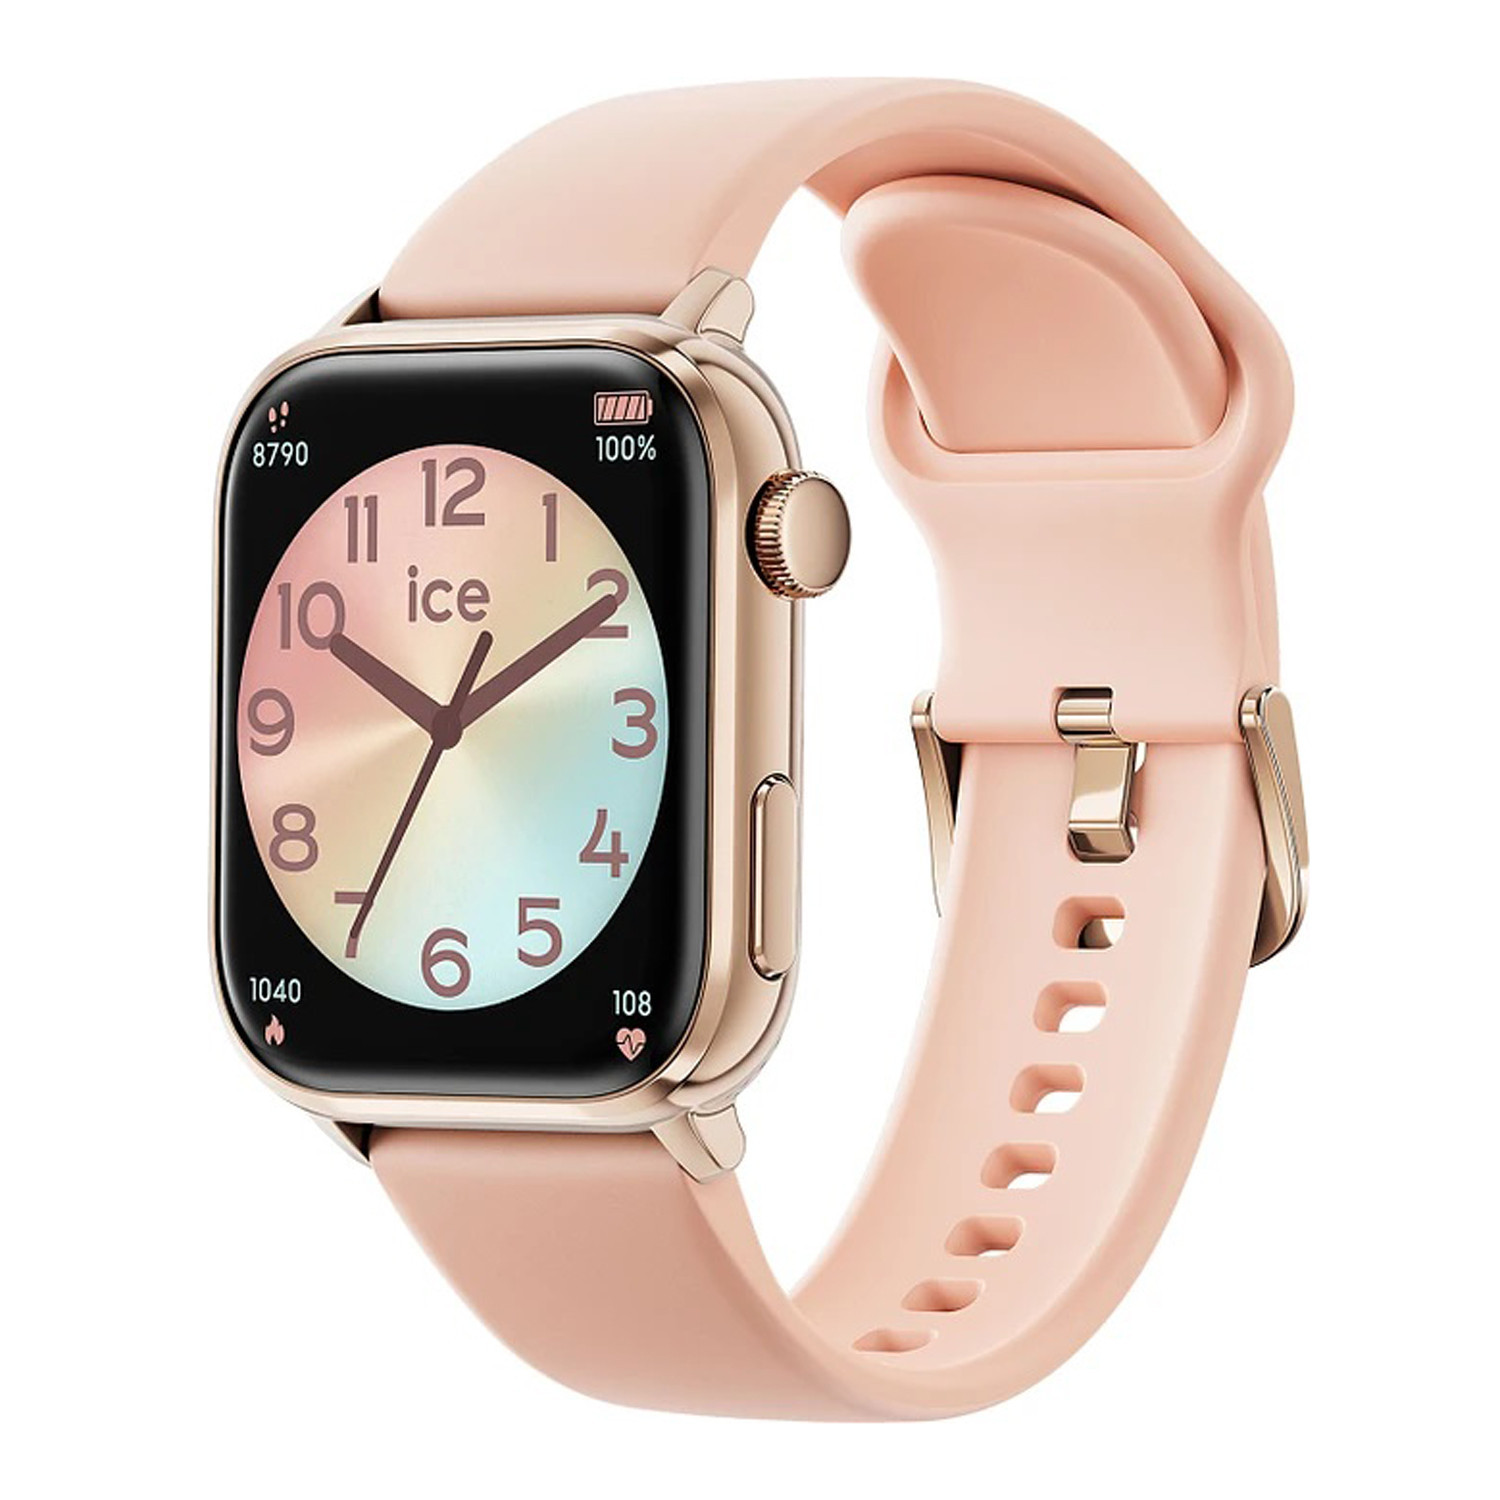 Montre femme Ice Watch connectée Ice Smart two
rose gold nude amoled